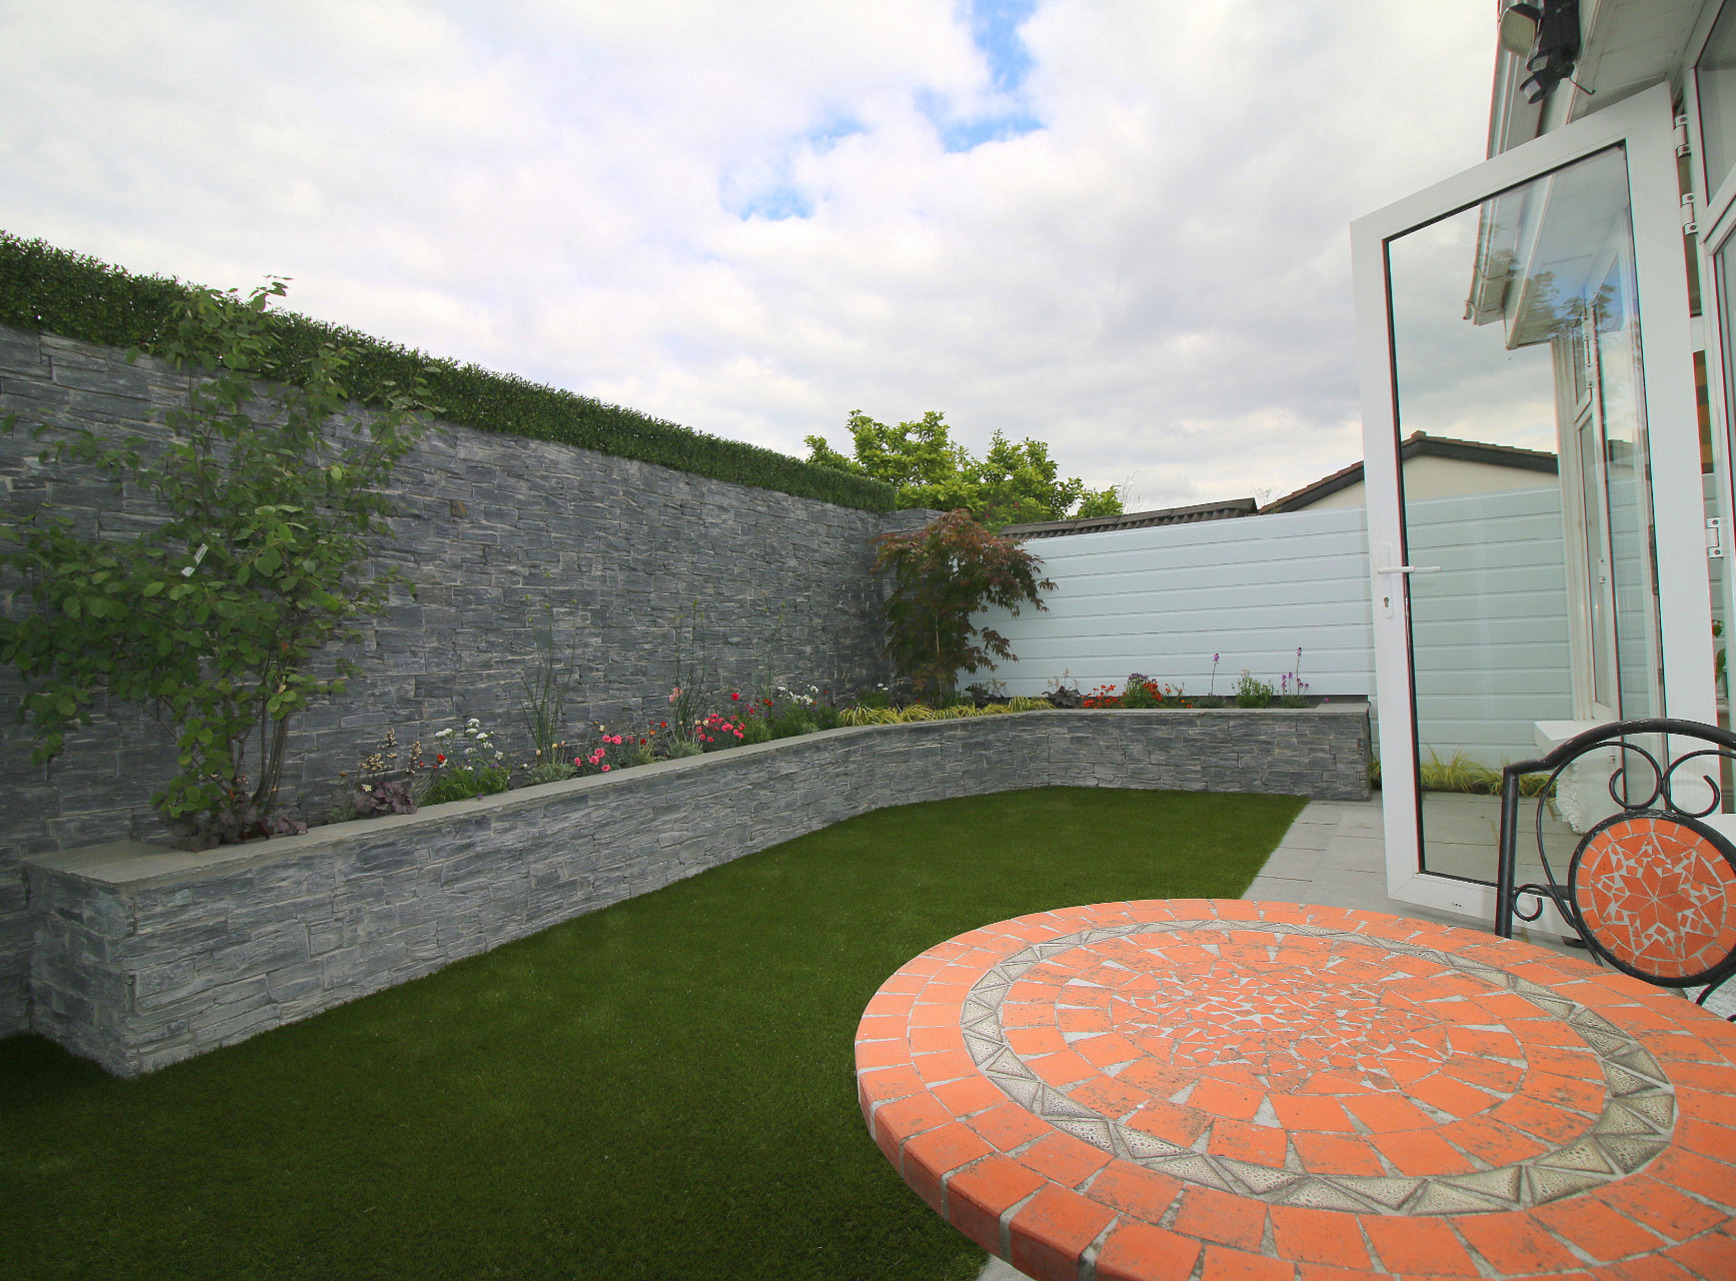 Natural Stone Cladding & Boxwood Cladding to create a feature wall in Terenure Garden | Owen Chubb